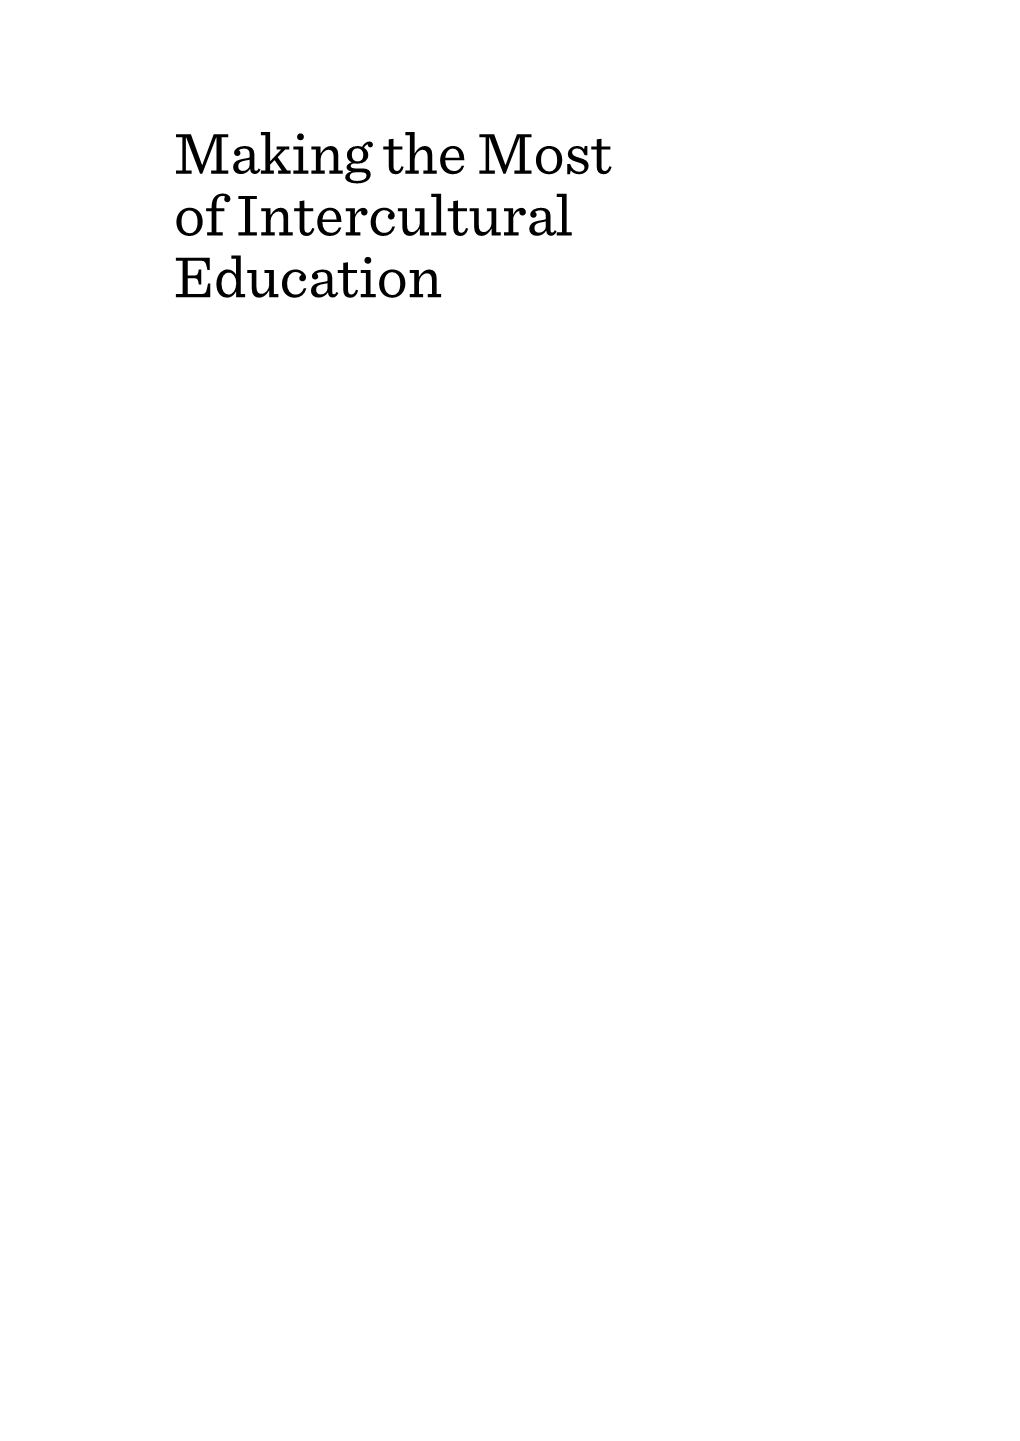 Making the Most of Intercultural Education from the Series Post-Intercultural Communication and Education